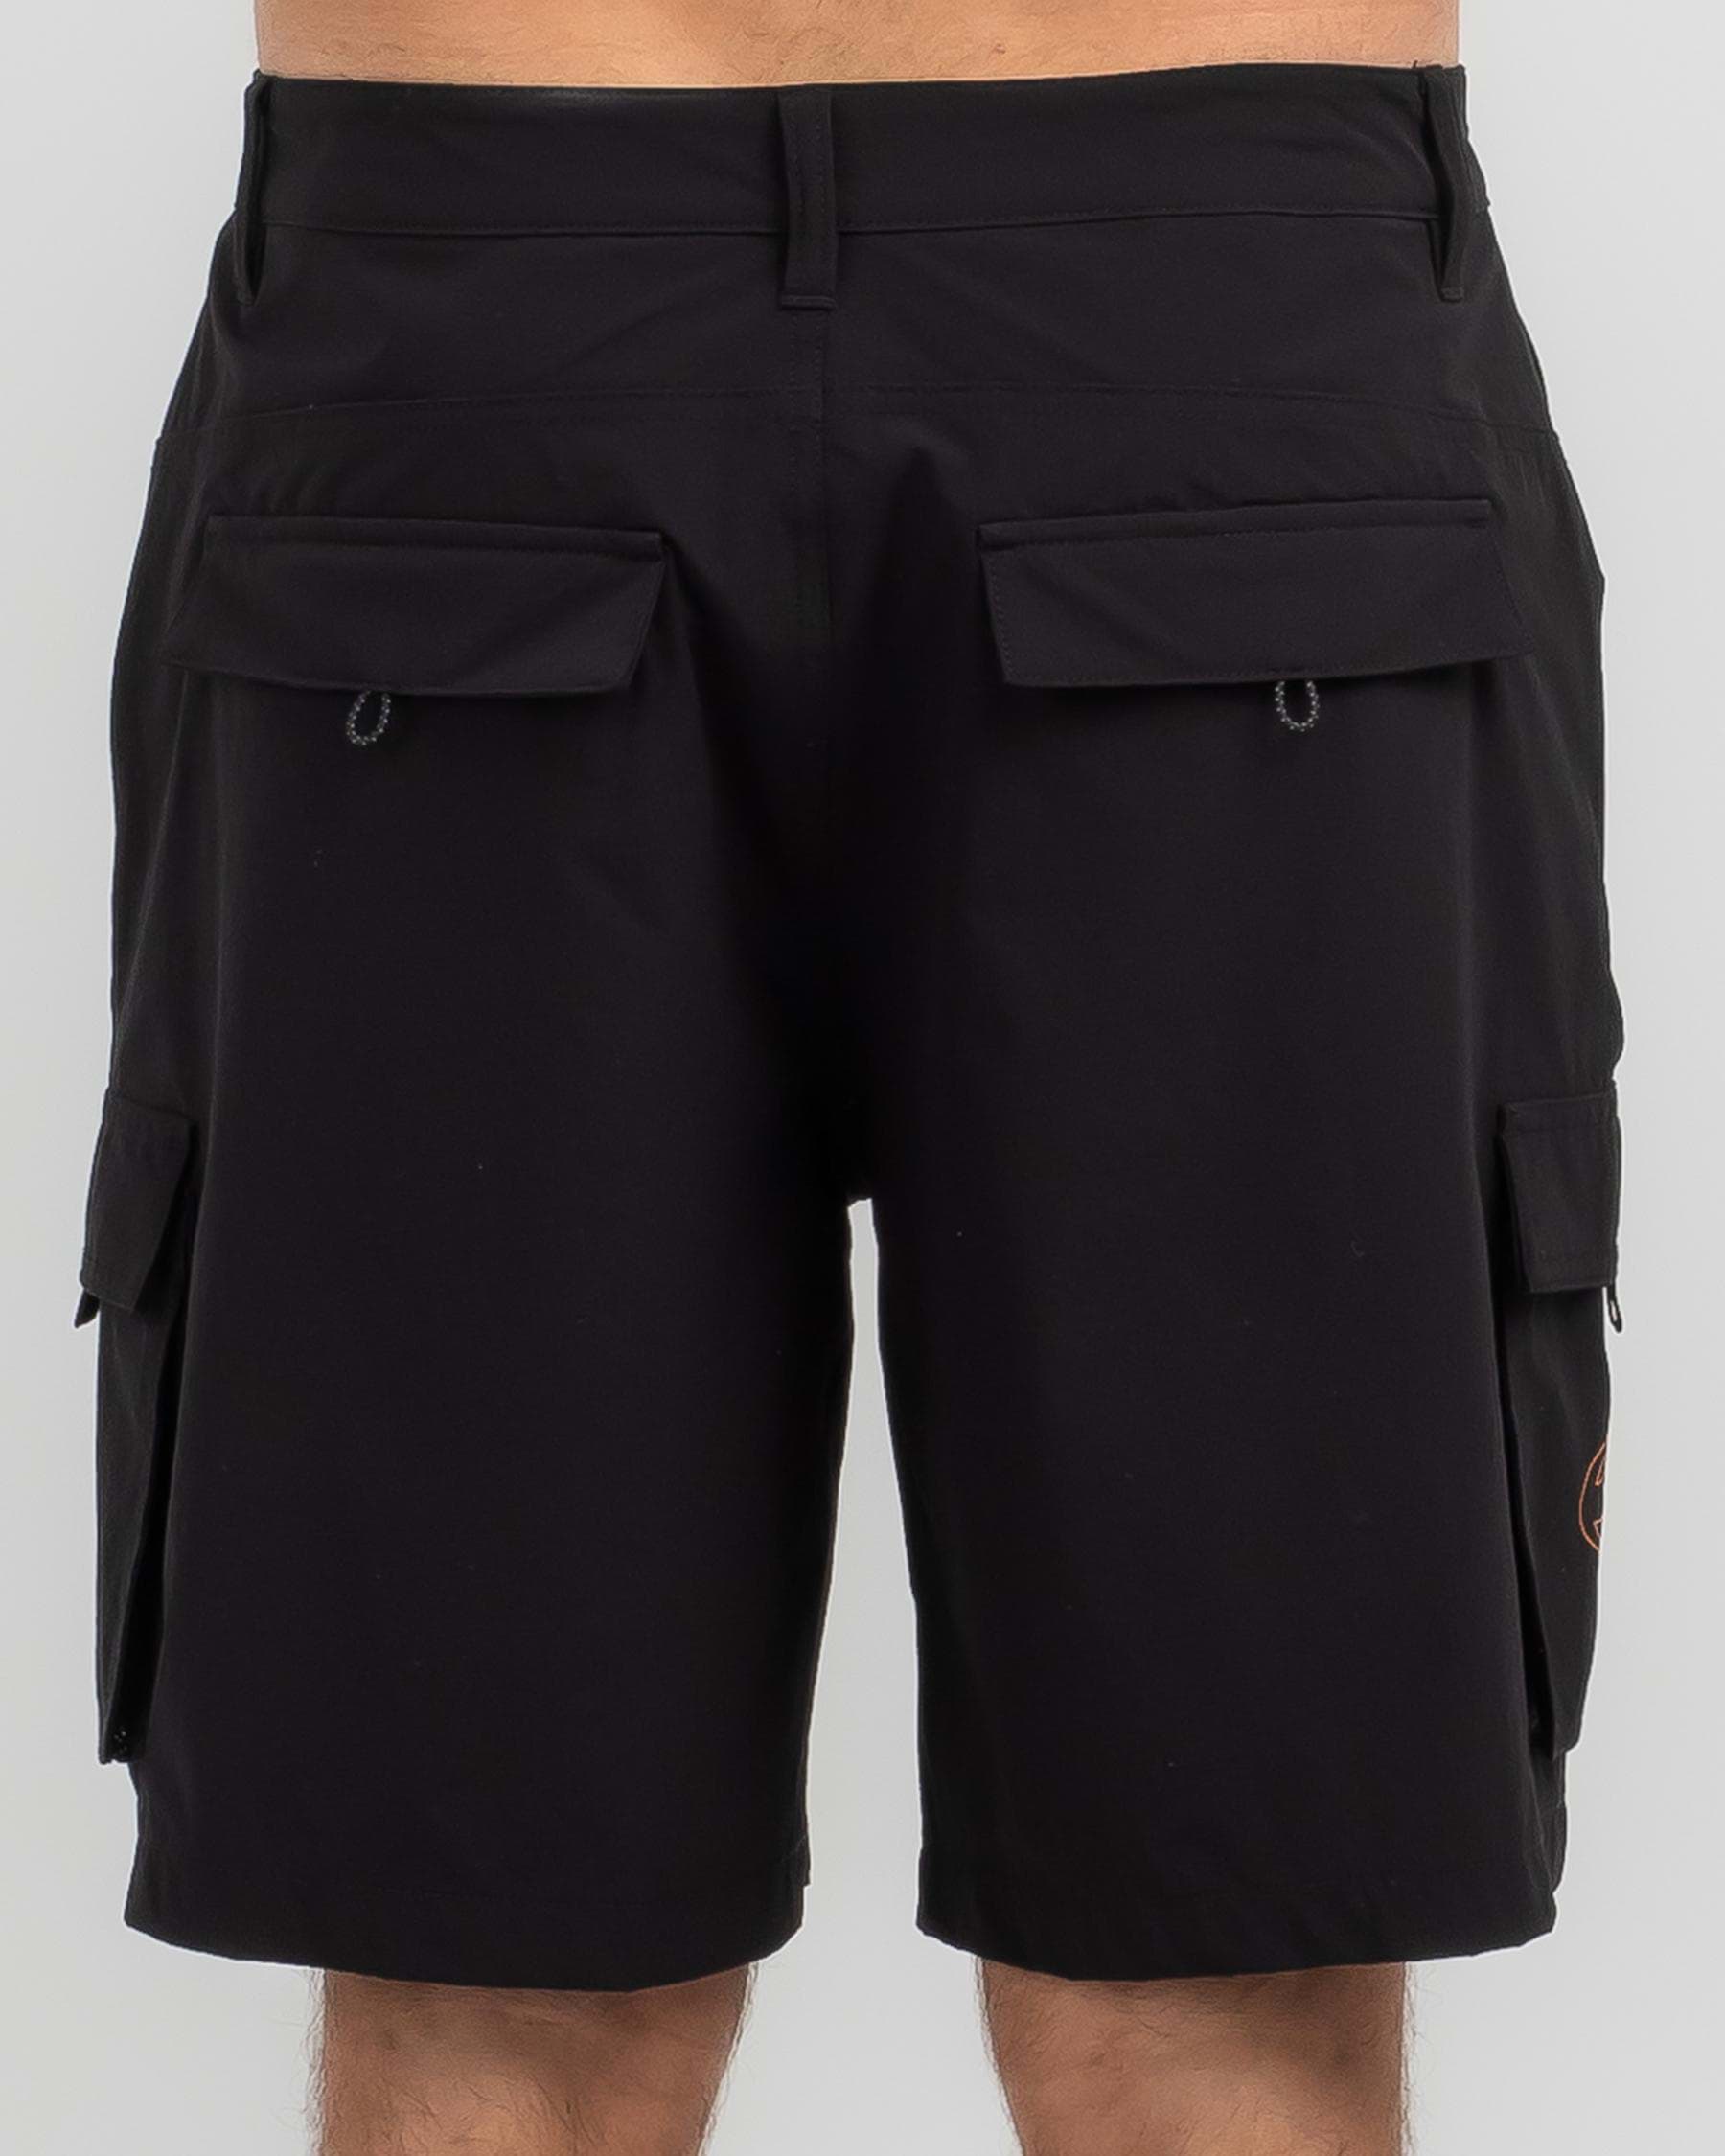 Quiksilver Equalizer Walk Shorts In Black - Fast Shipping & Easy ...